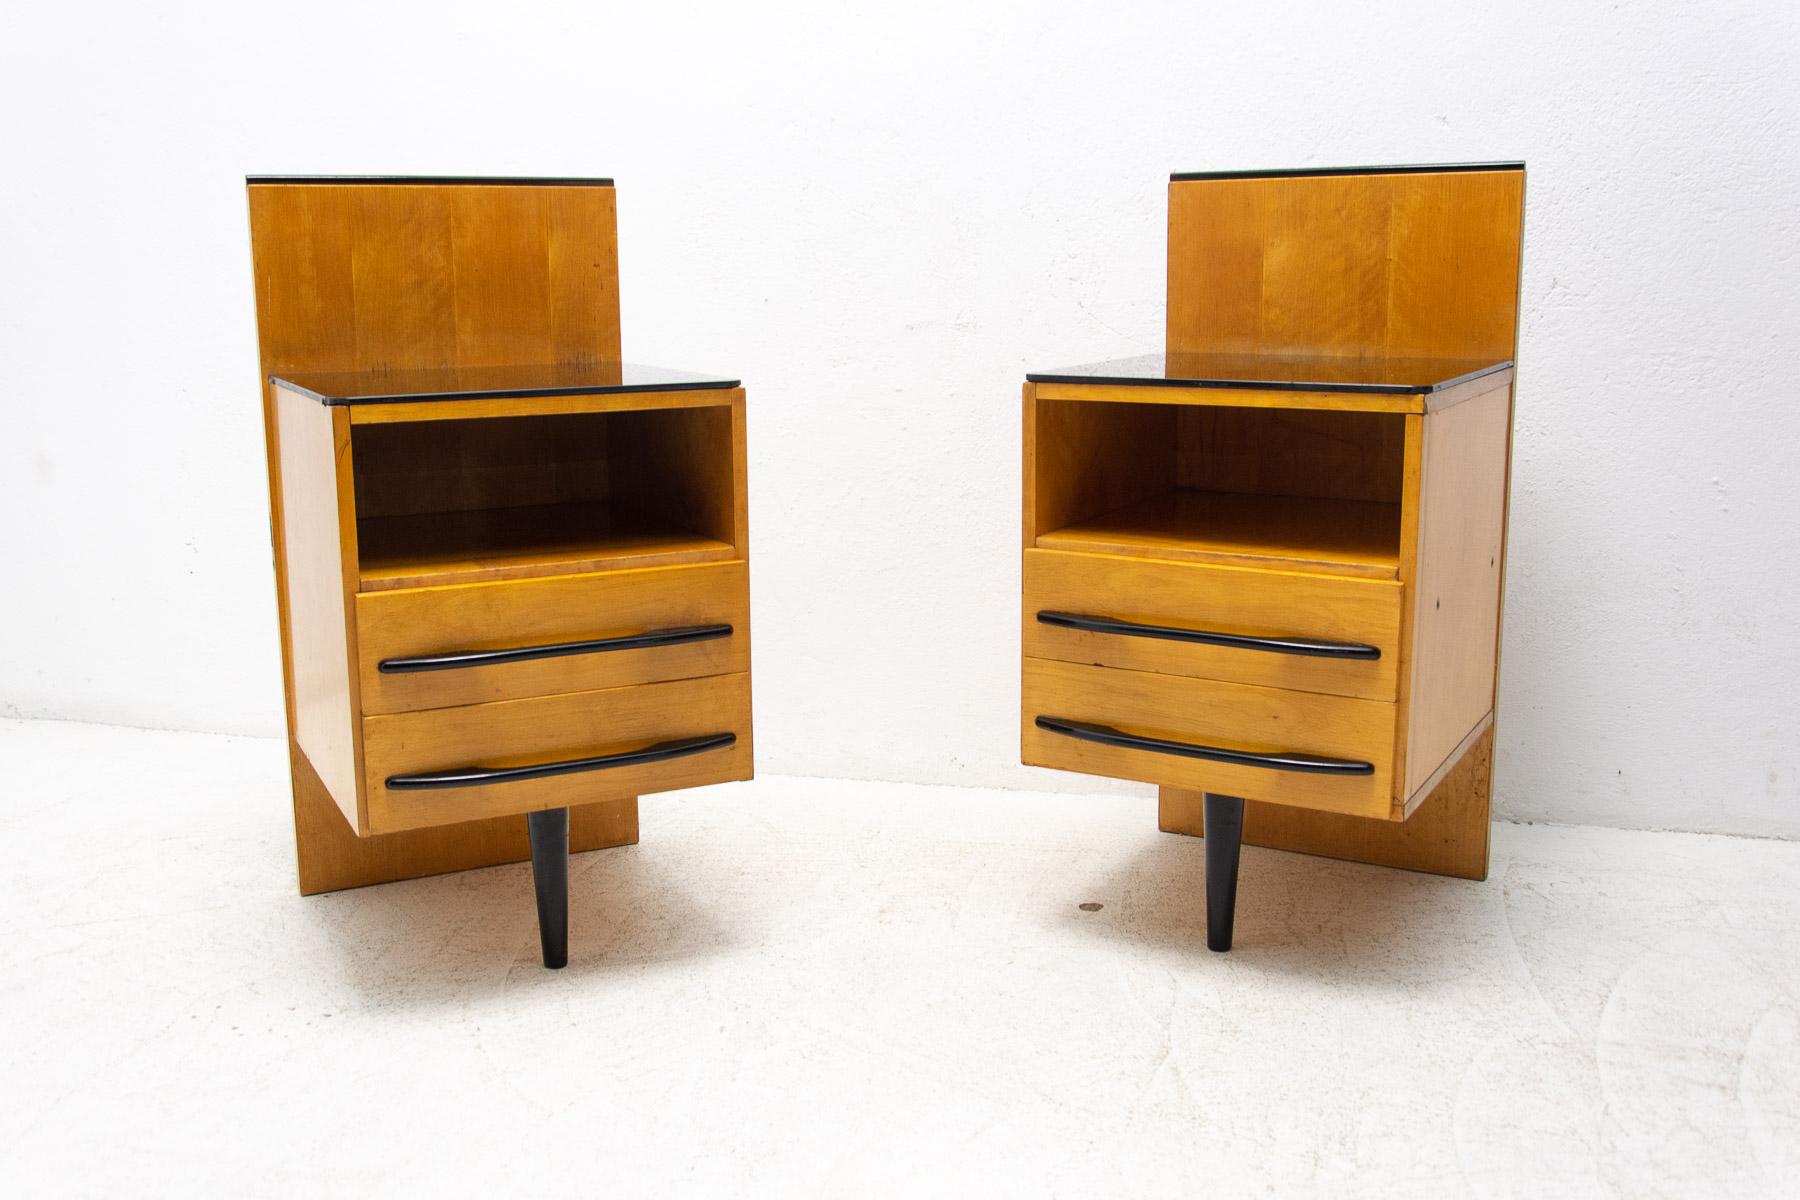 This nightstand/bedside table was designed by Mojmír Požár for UP Závody and made in the former Czechoslovakia in the 1960´s. Made of ash wood and black glass.
In good Vintage condition, showing signs of age and using.

Price is for the